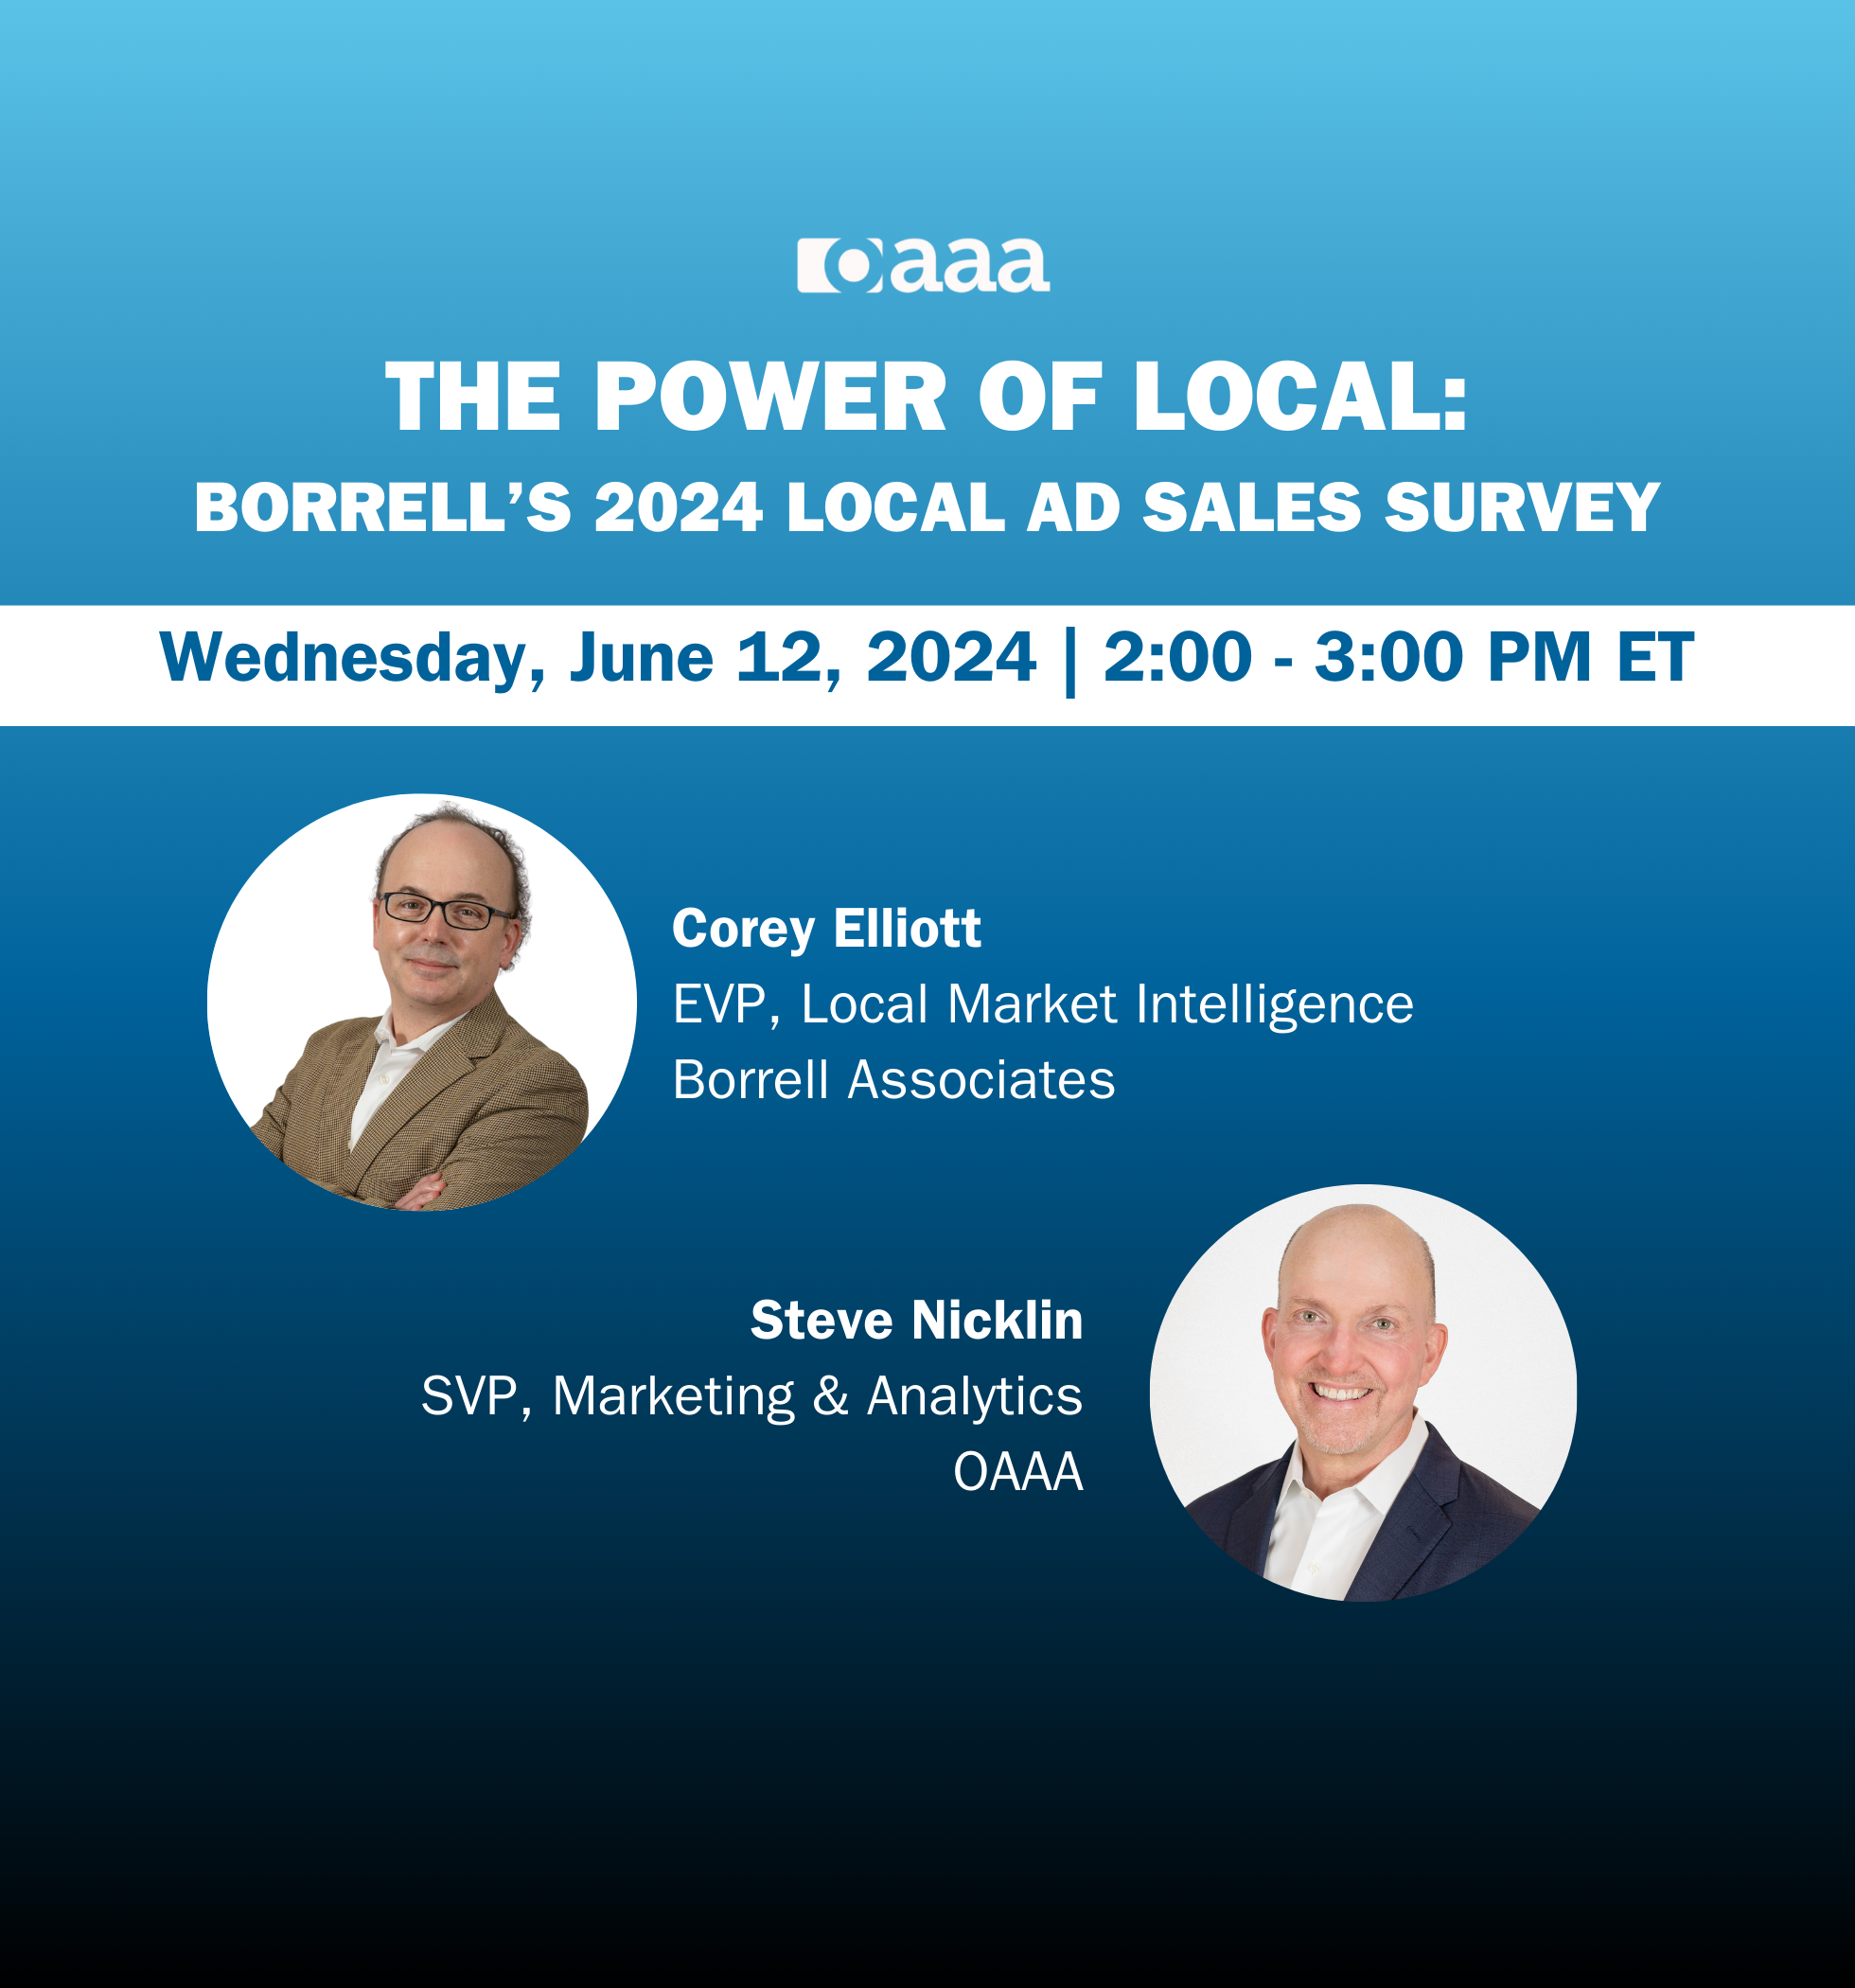 The Power of Local: Borrell’s 2024 Local Ad Sales Survey